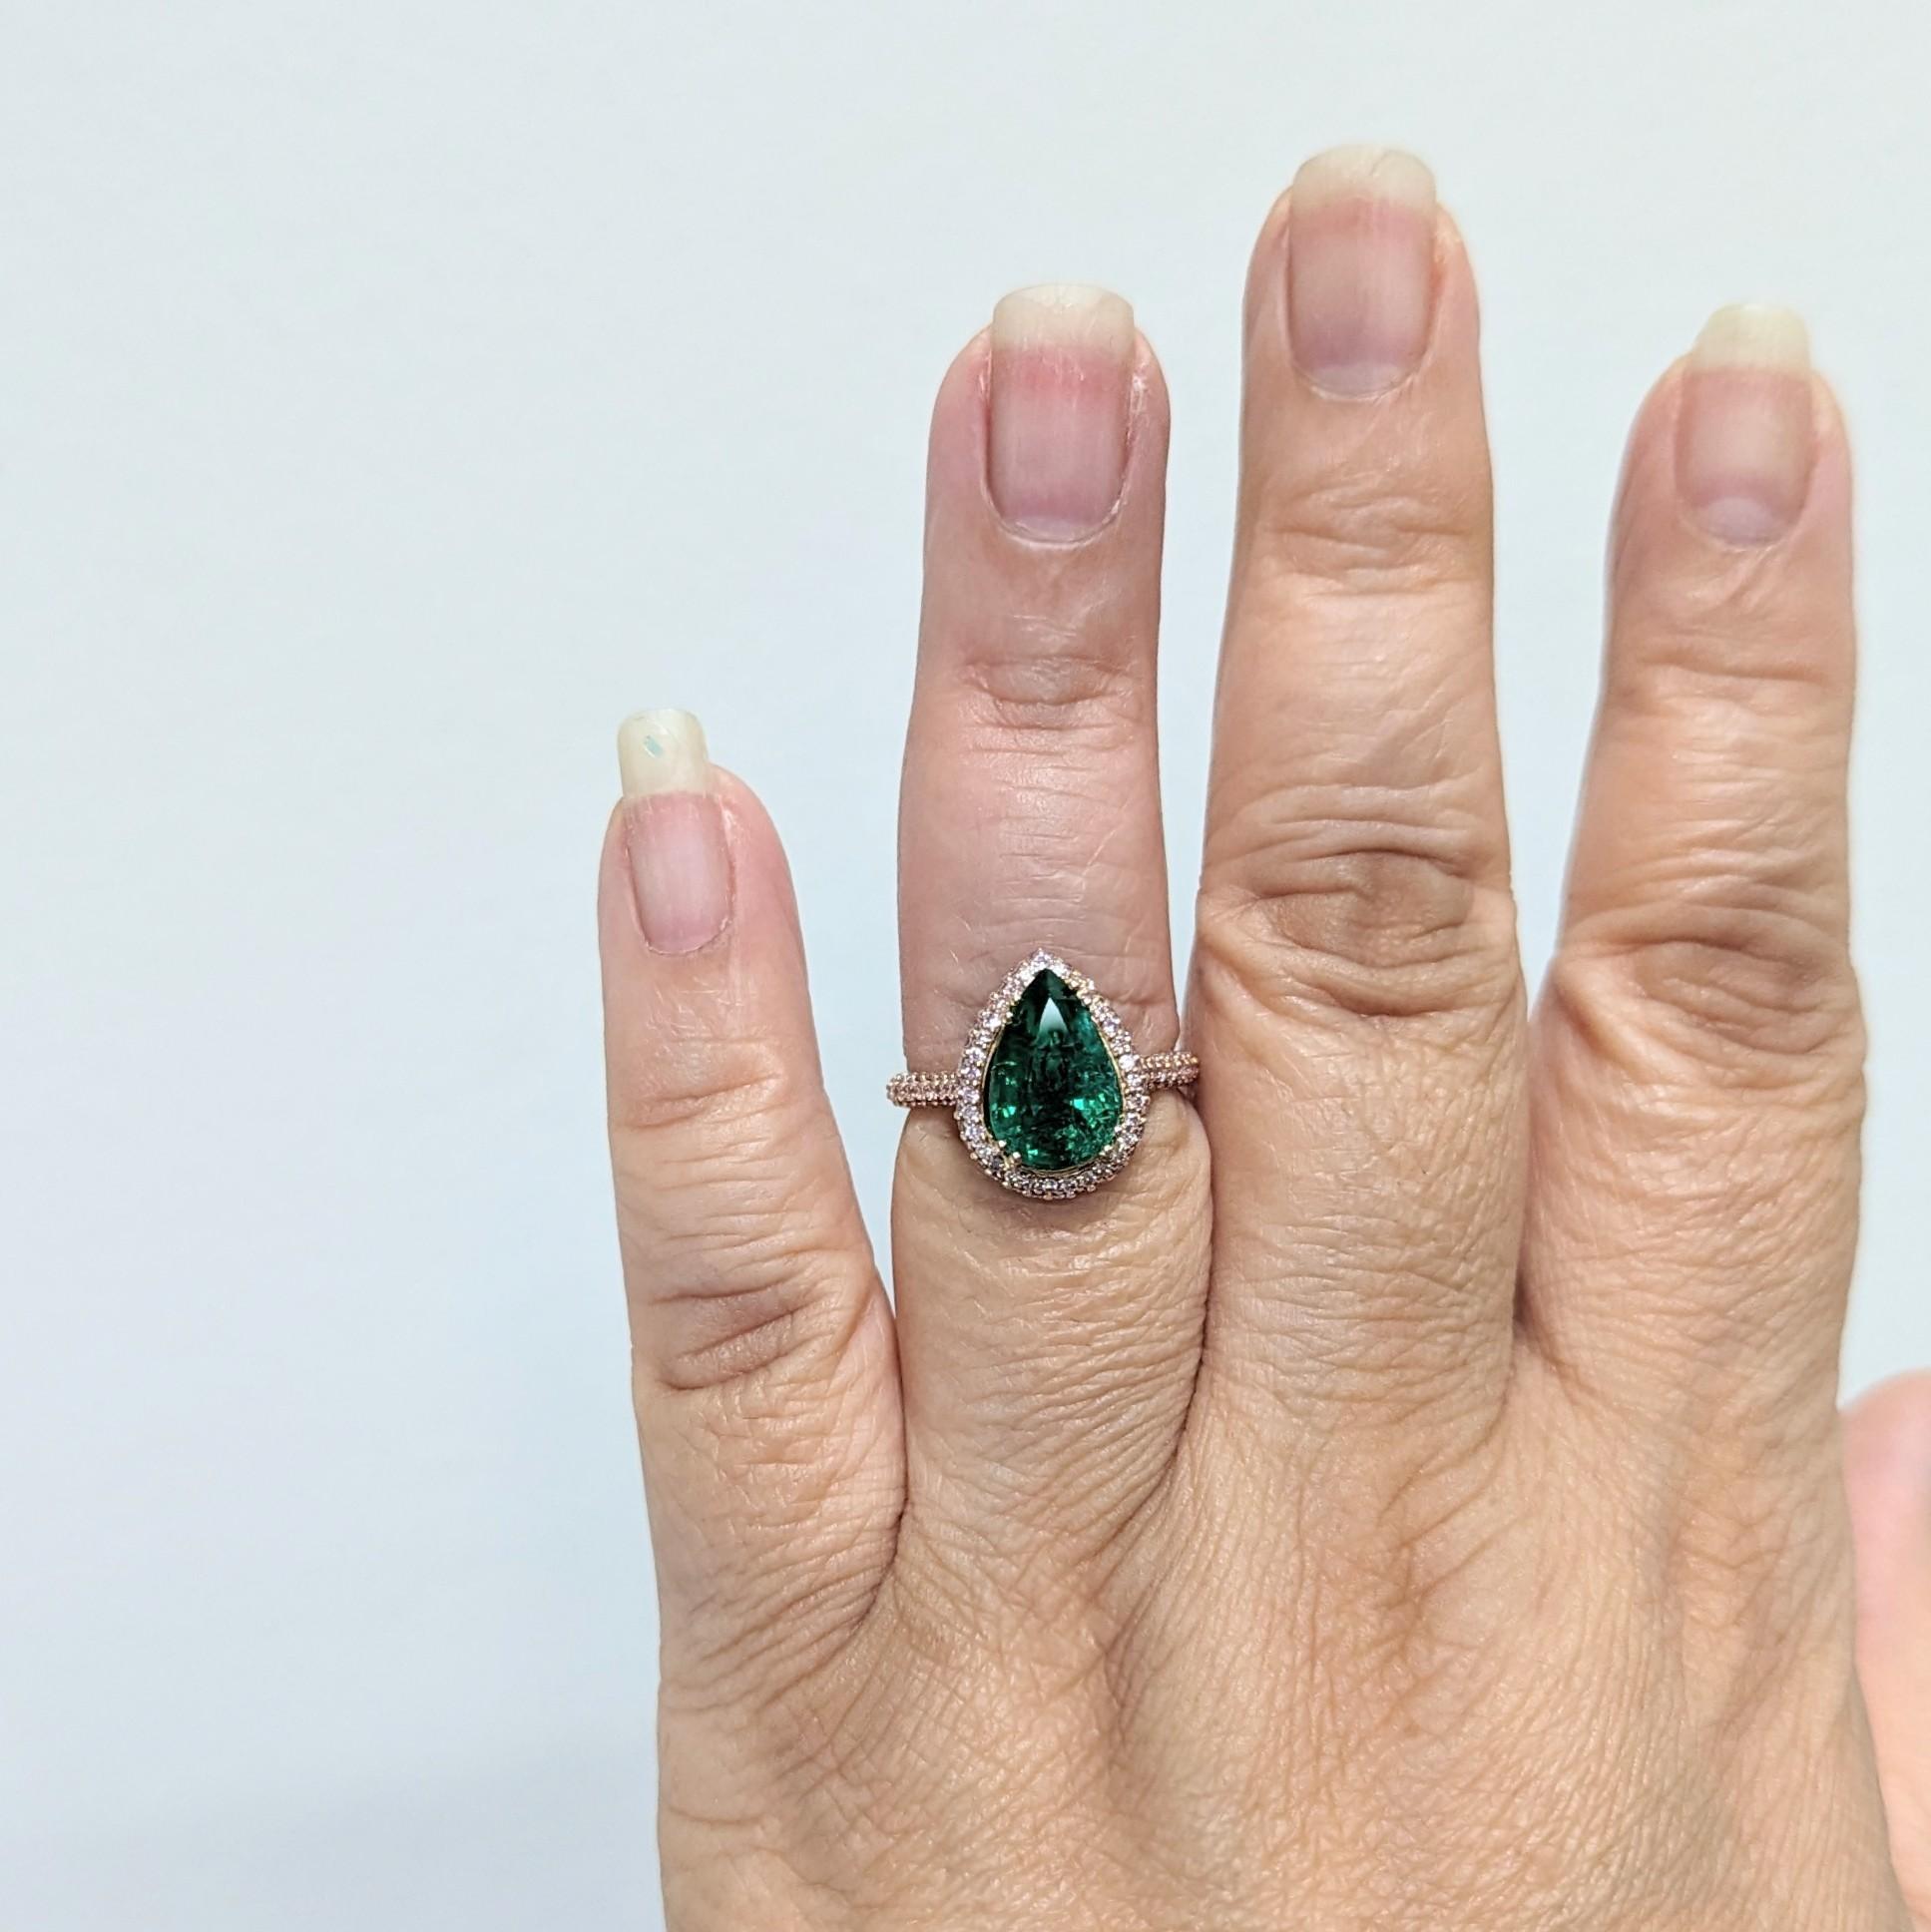 Beautiful 4.25 ct. emerald pear shape with 0.50 ct. natural pink diamond rounds.  Handmade in 18k rose gold.  Ring size 6.5.